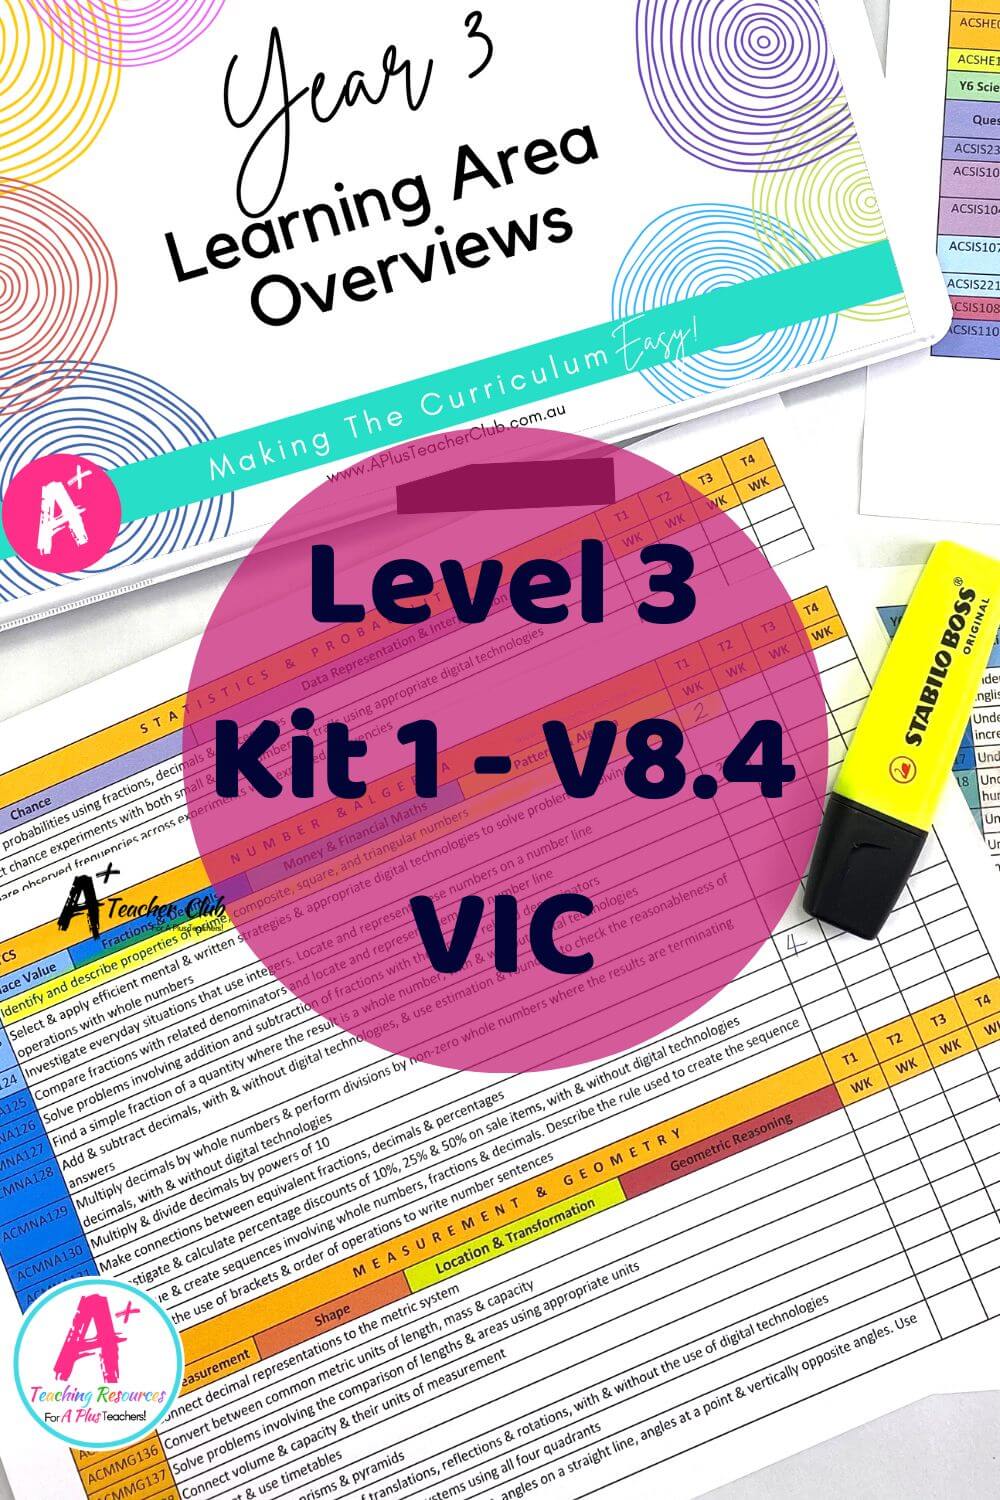 Level 3 Forward Planning Curriculum Overview VIC 8.4